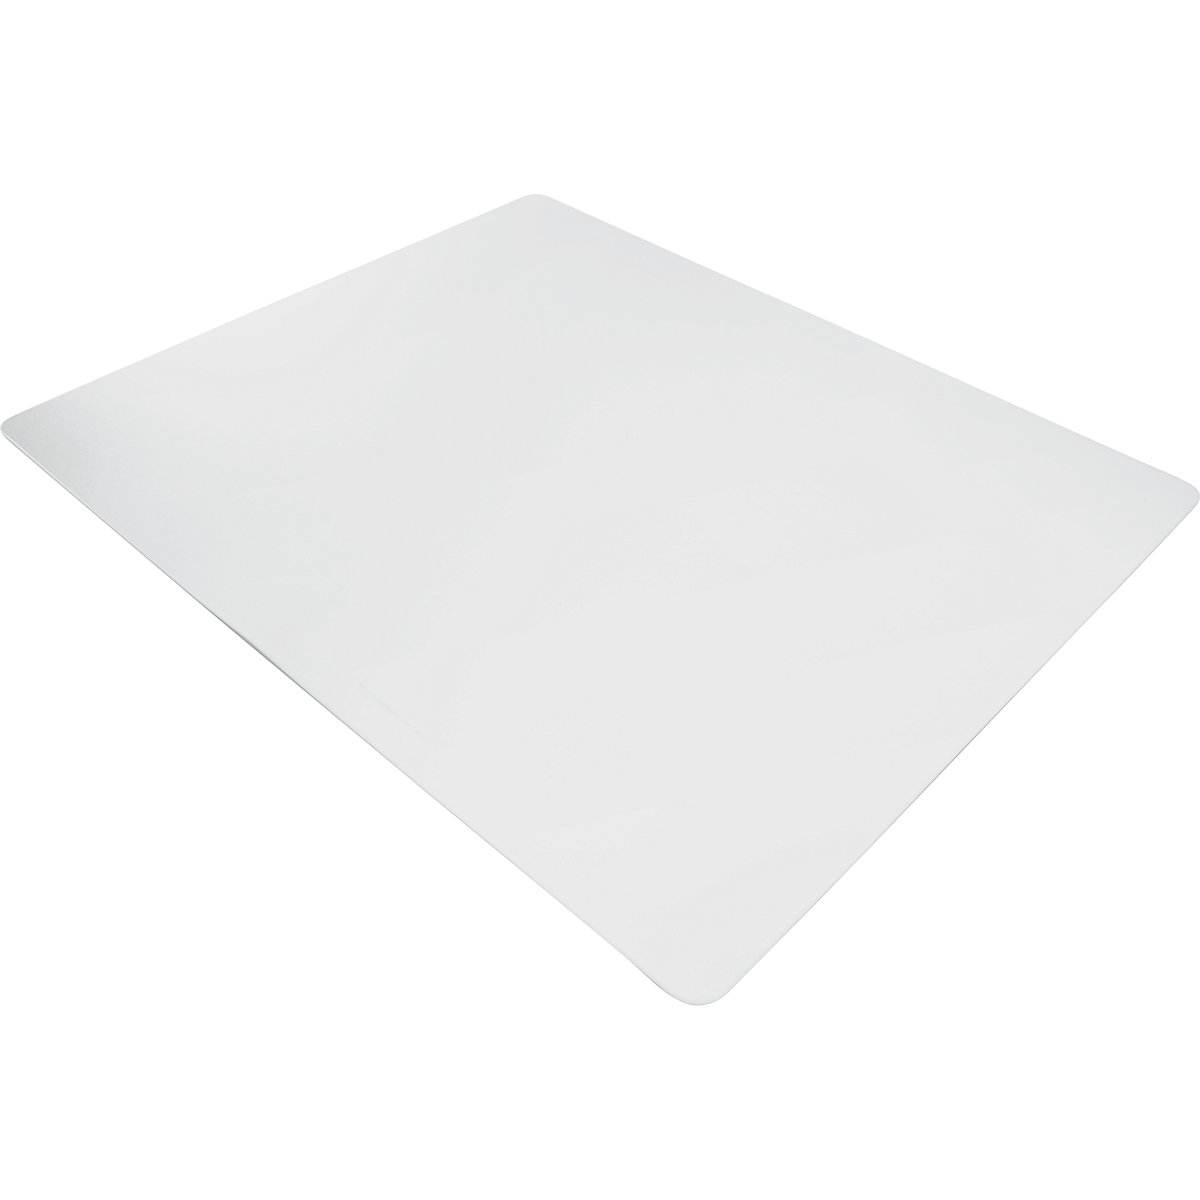 Floor protection mat ECOGRIP SOLID, for smooth and hard floors, WxD 1300 x 1200 mm-6